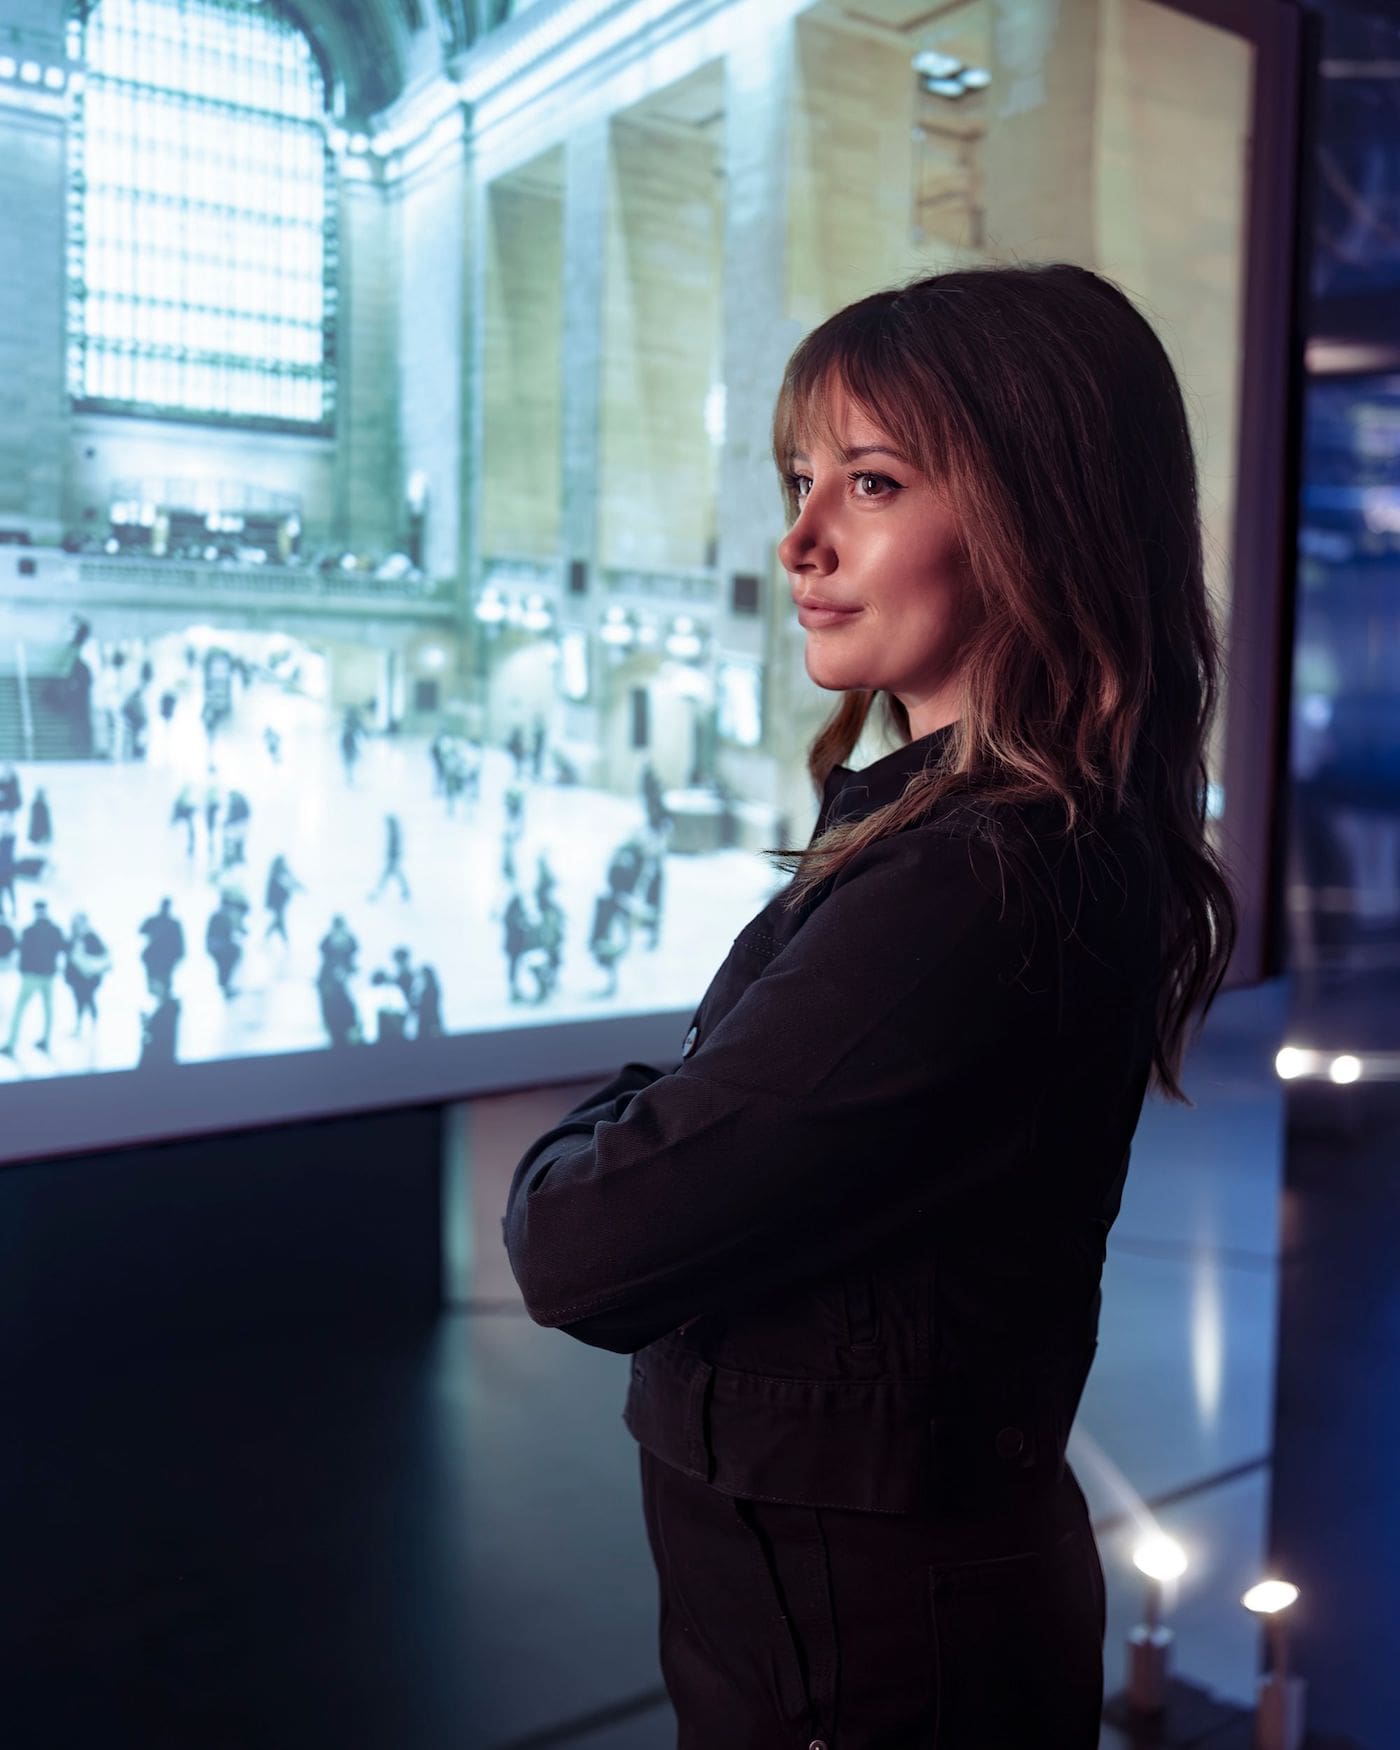 Ashley Tisdale looks over Grand Central Station with arms folded